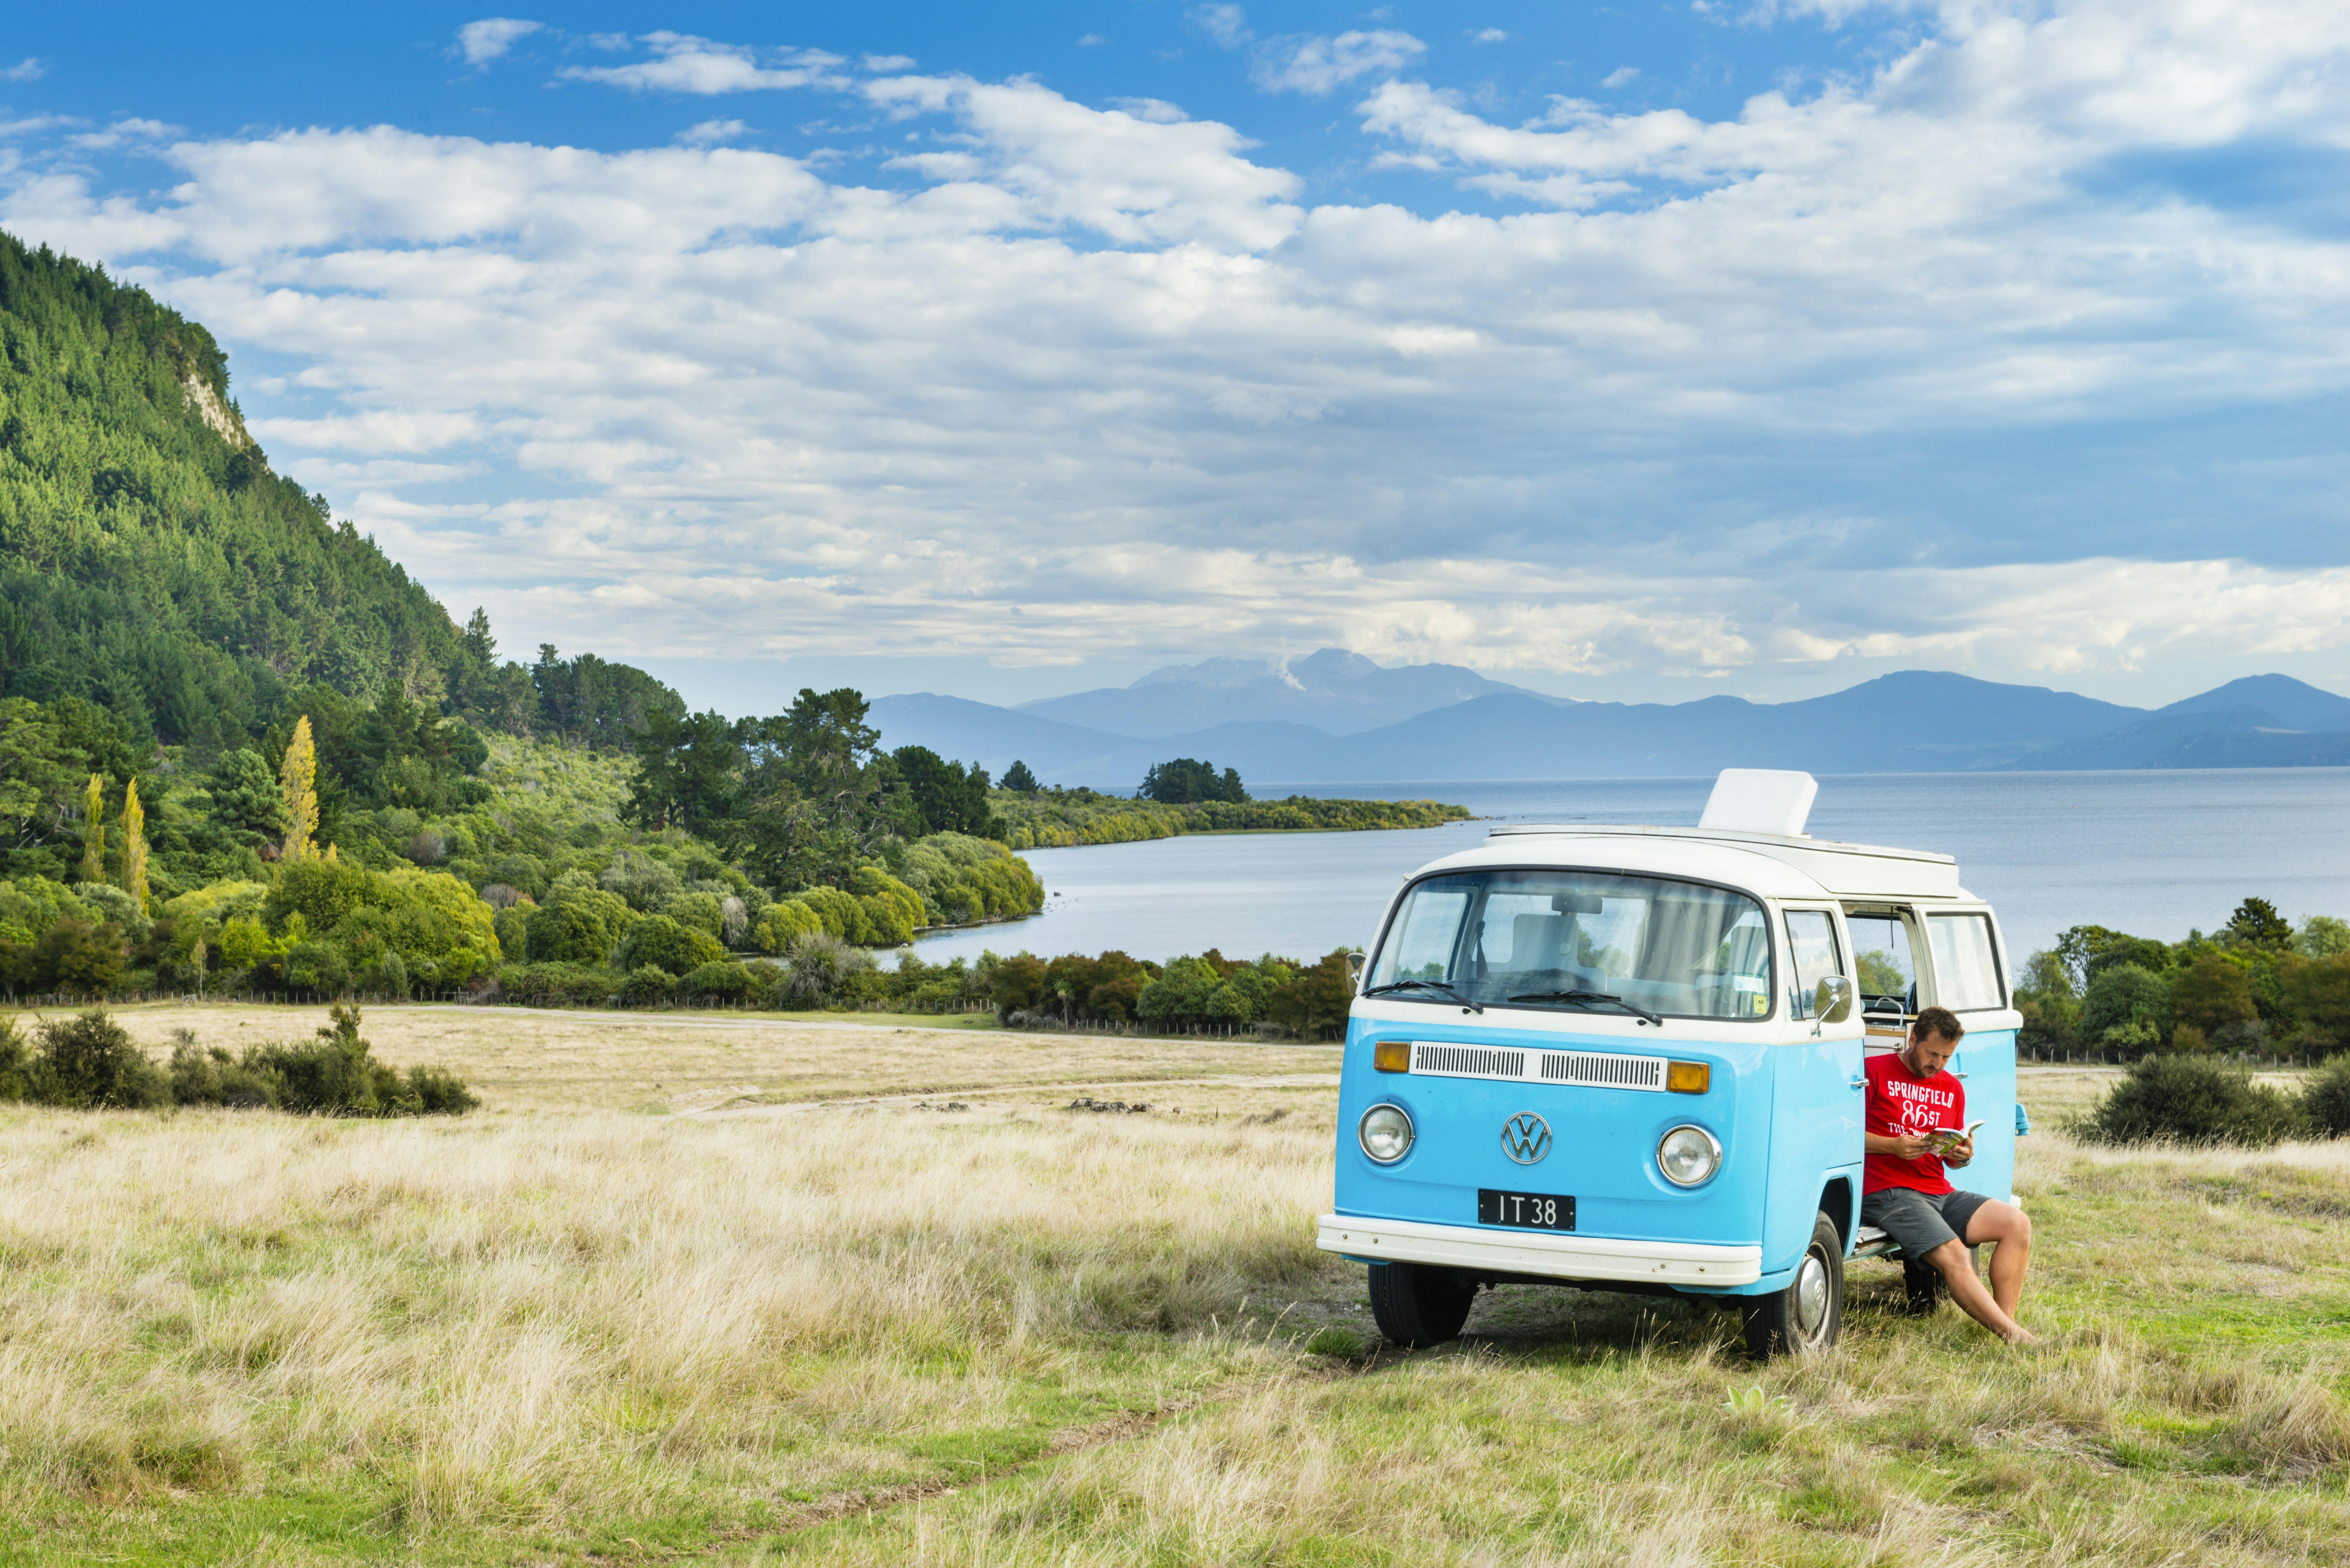 A man in a red T-shirt is sitting in the open door of a bright blue VW campervan reading. The can is parked on grassy terrain beside a beautiful lake lined with green trees.